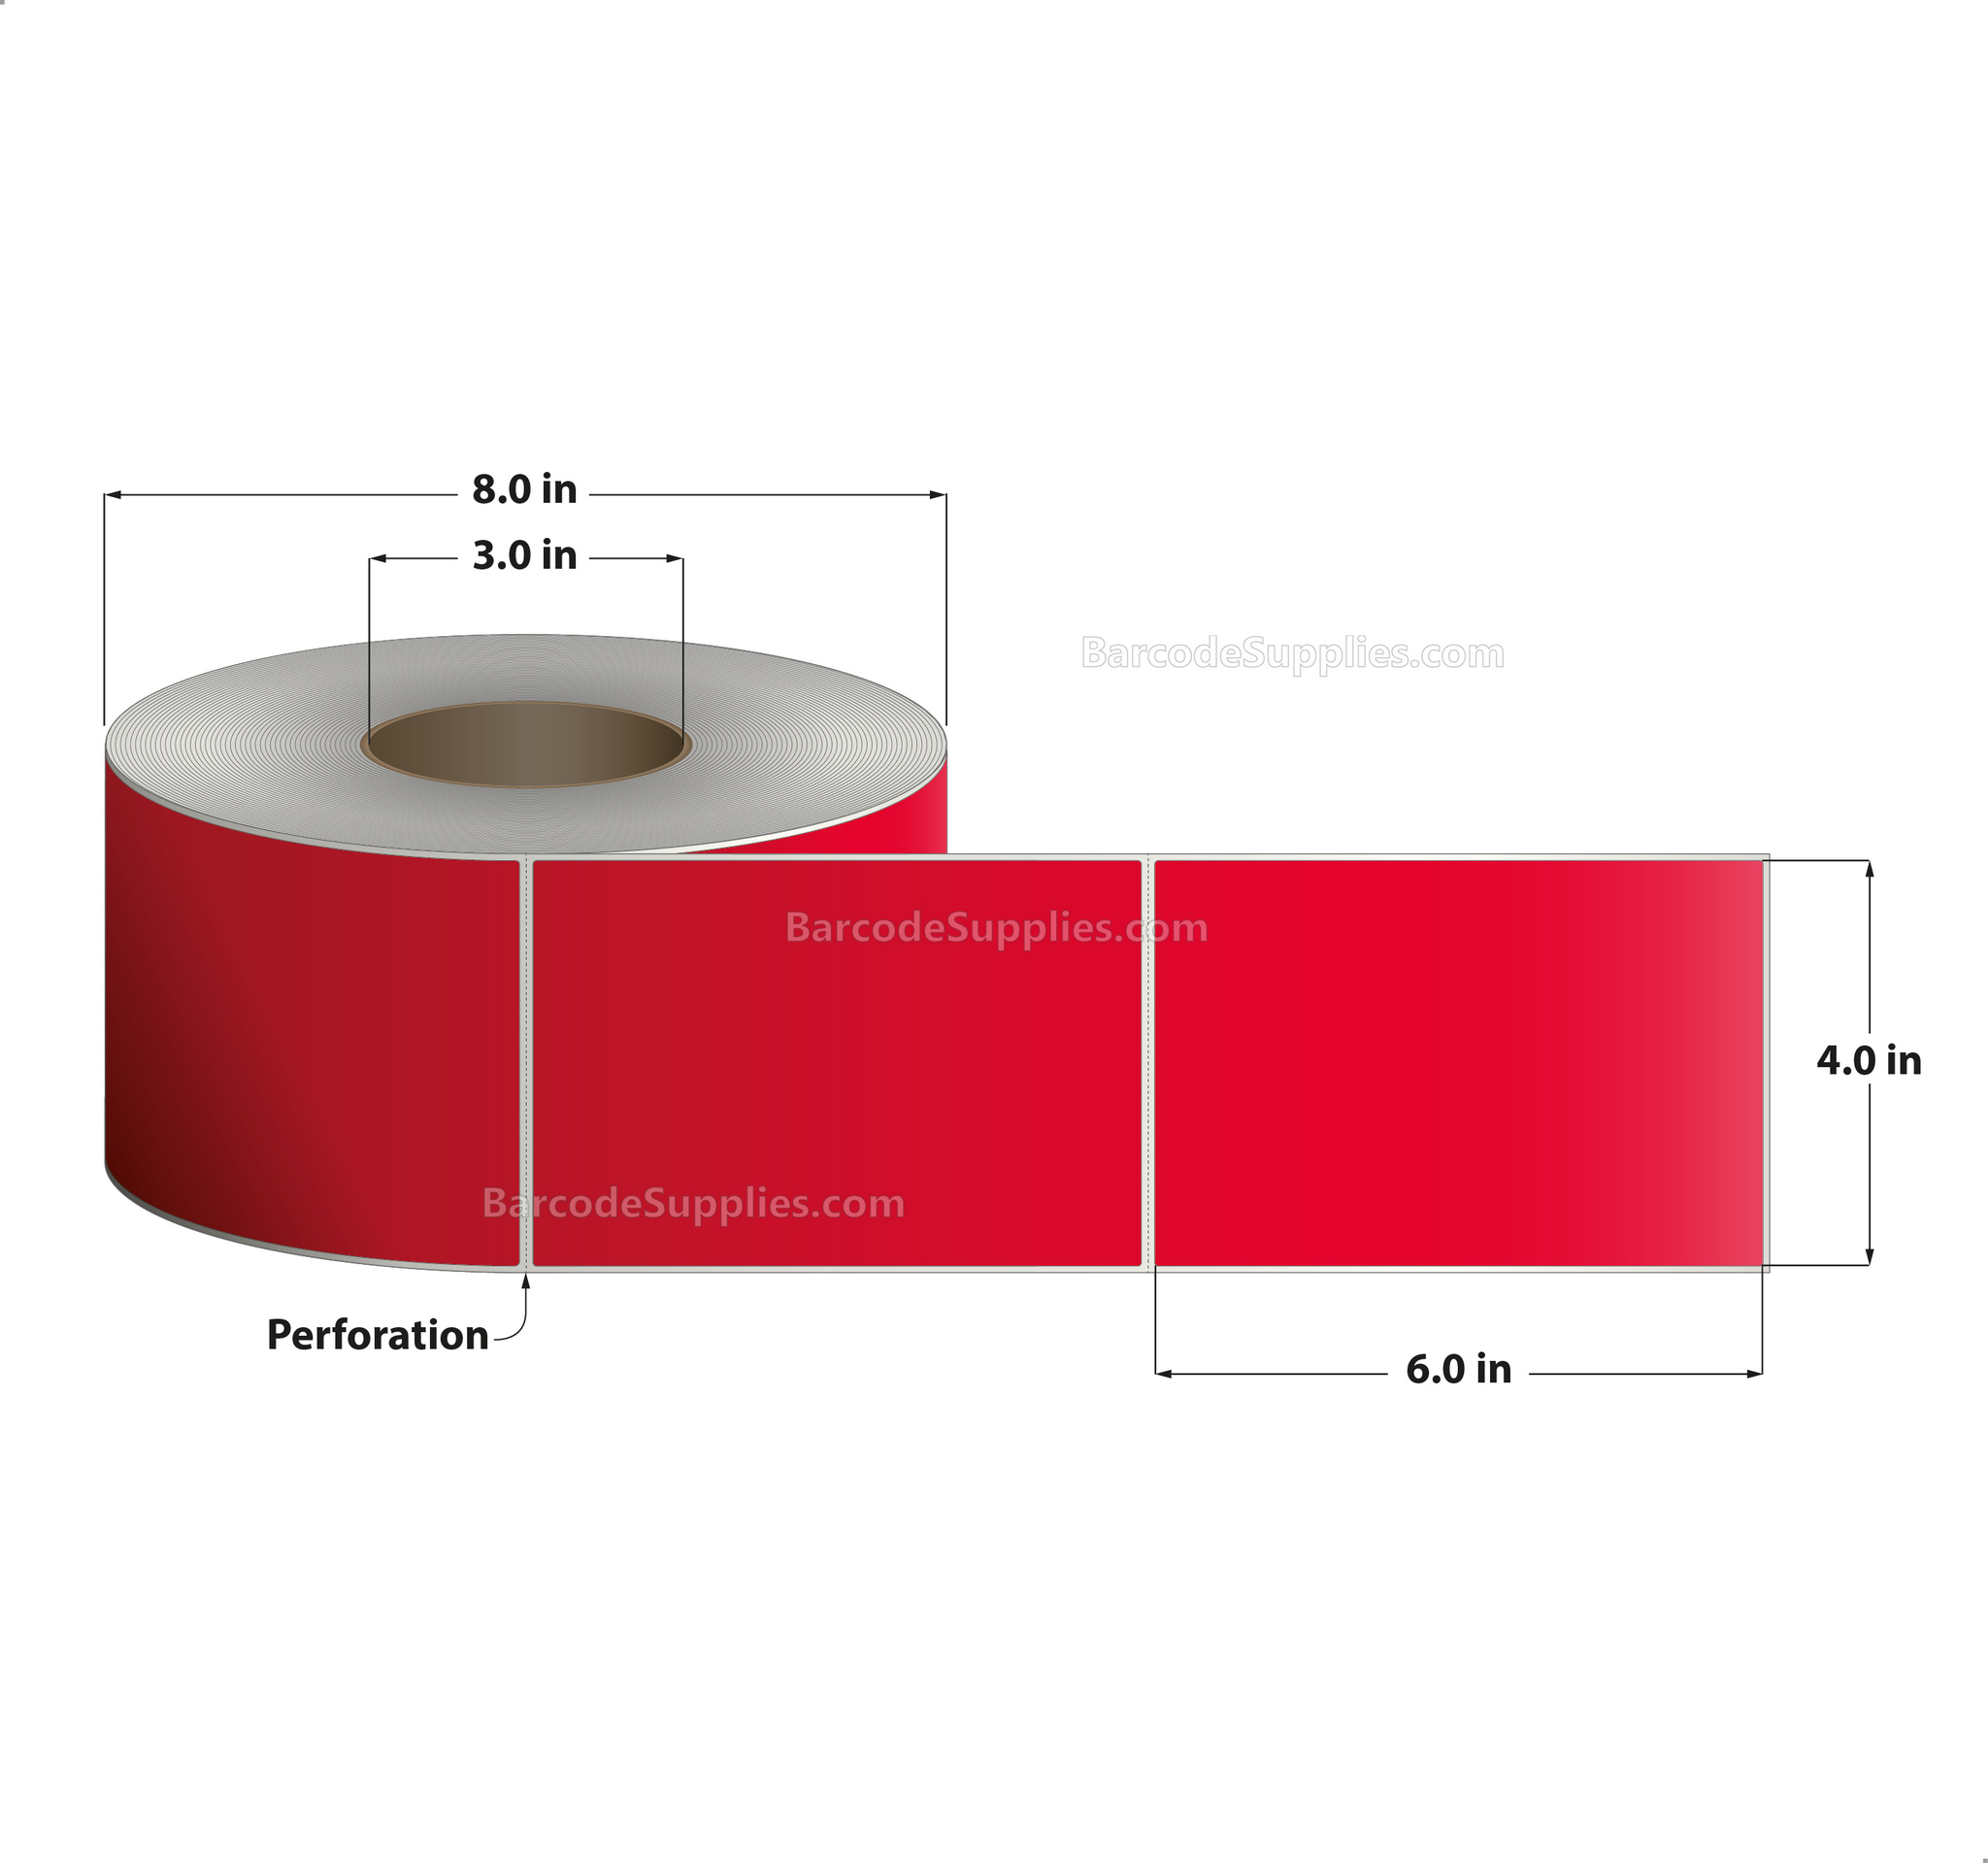 4 x 6 Thermal Transfer 032 Red Labels With Permanent Adhesive - Perforated - 1000 Labels Per Roll - Carton Of 4 Rolls - 4000 Labels Total - MPN: RFC-4-6-1000-RD